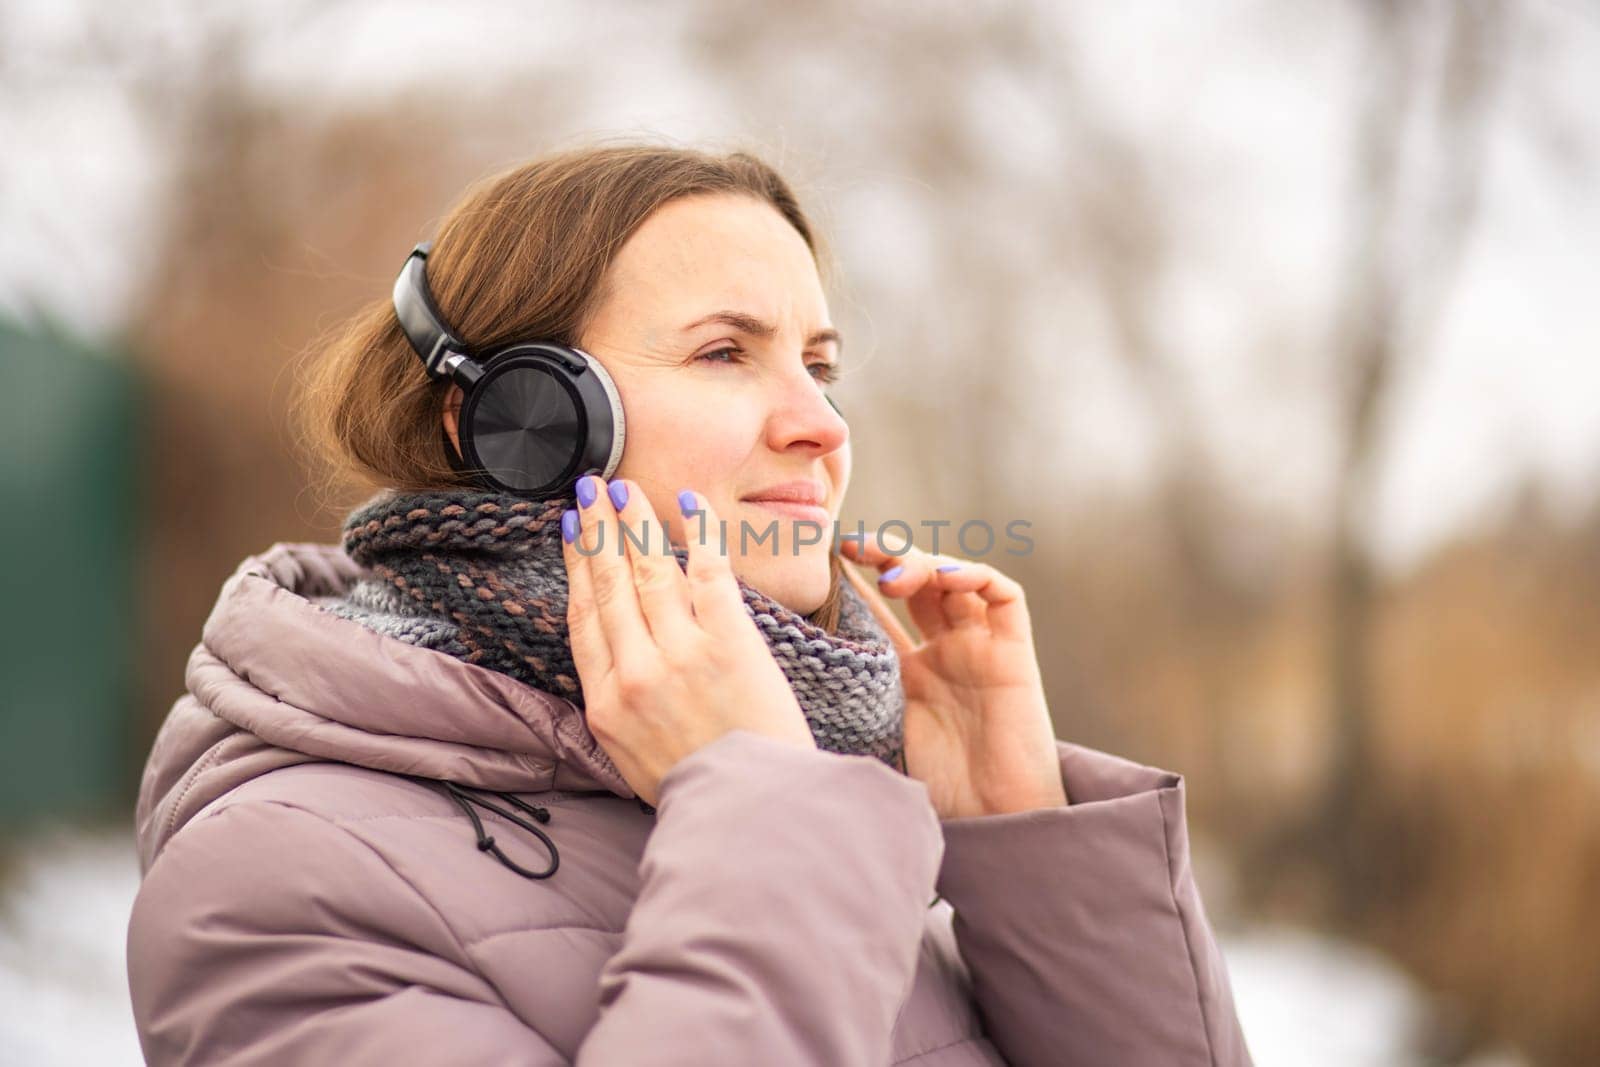 Joyful young woman in jacket listening to music via black headphones, relaxing in a park